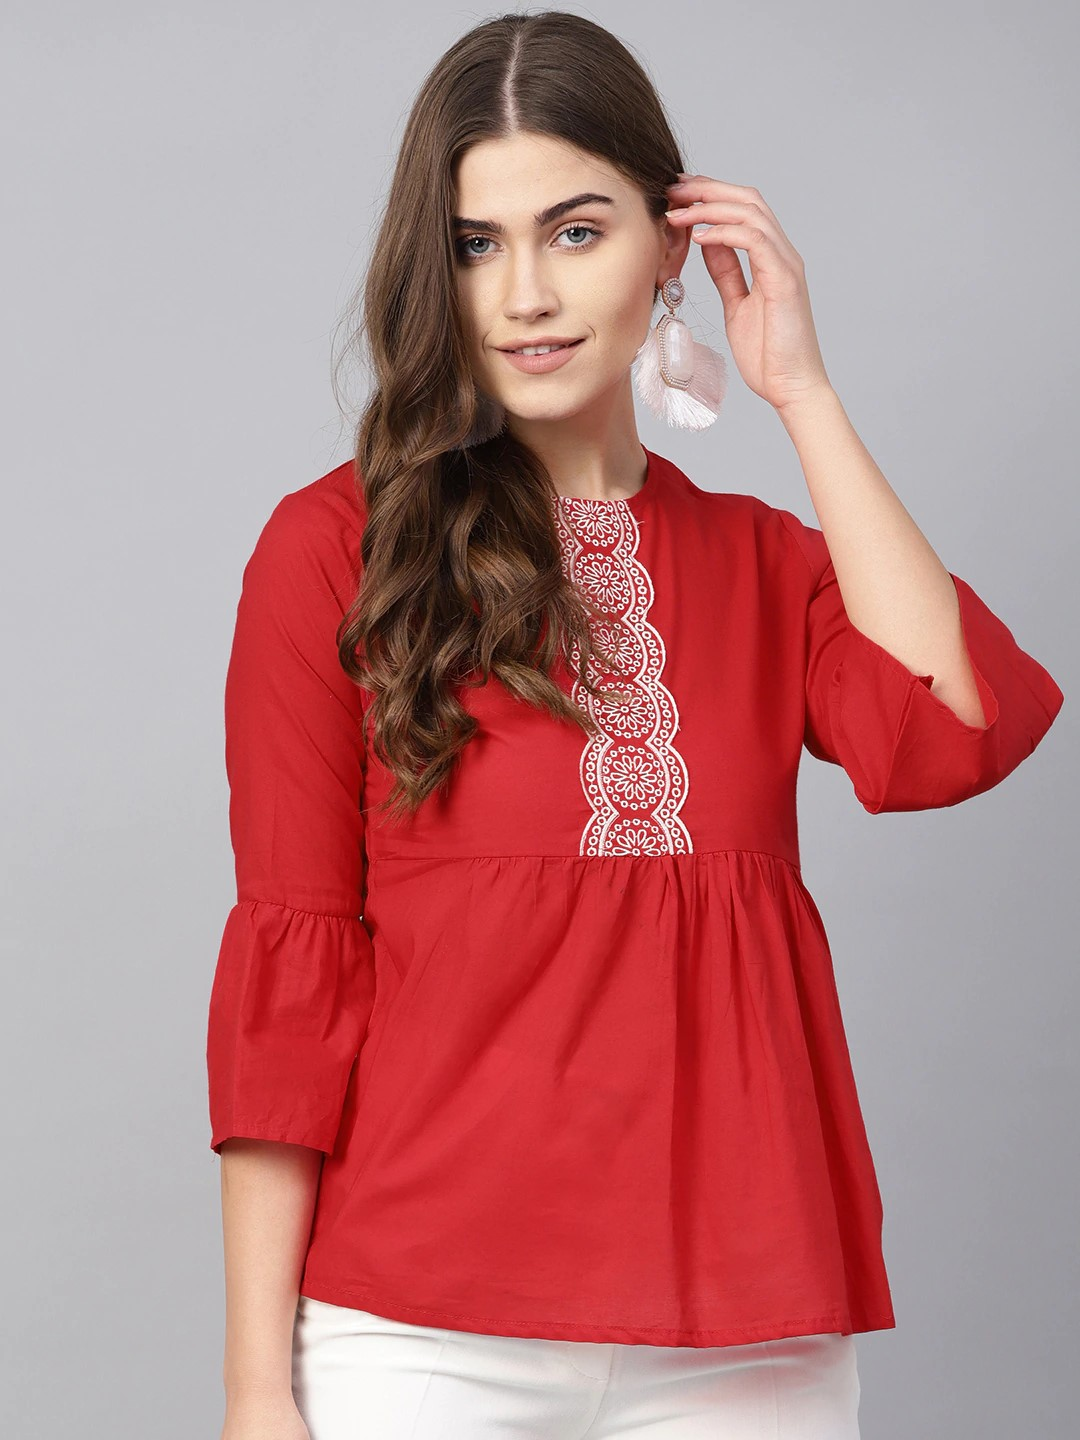 Women's  Red & White Embroidered Detail Empire Top - Wahe-NOOR